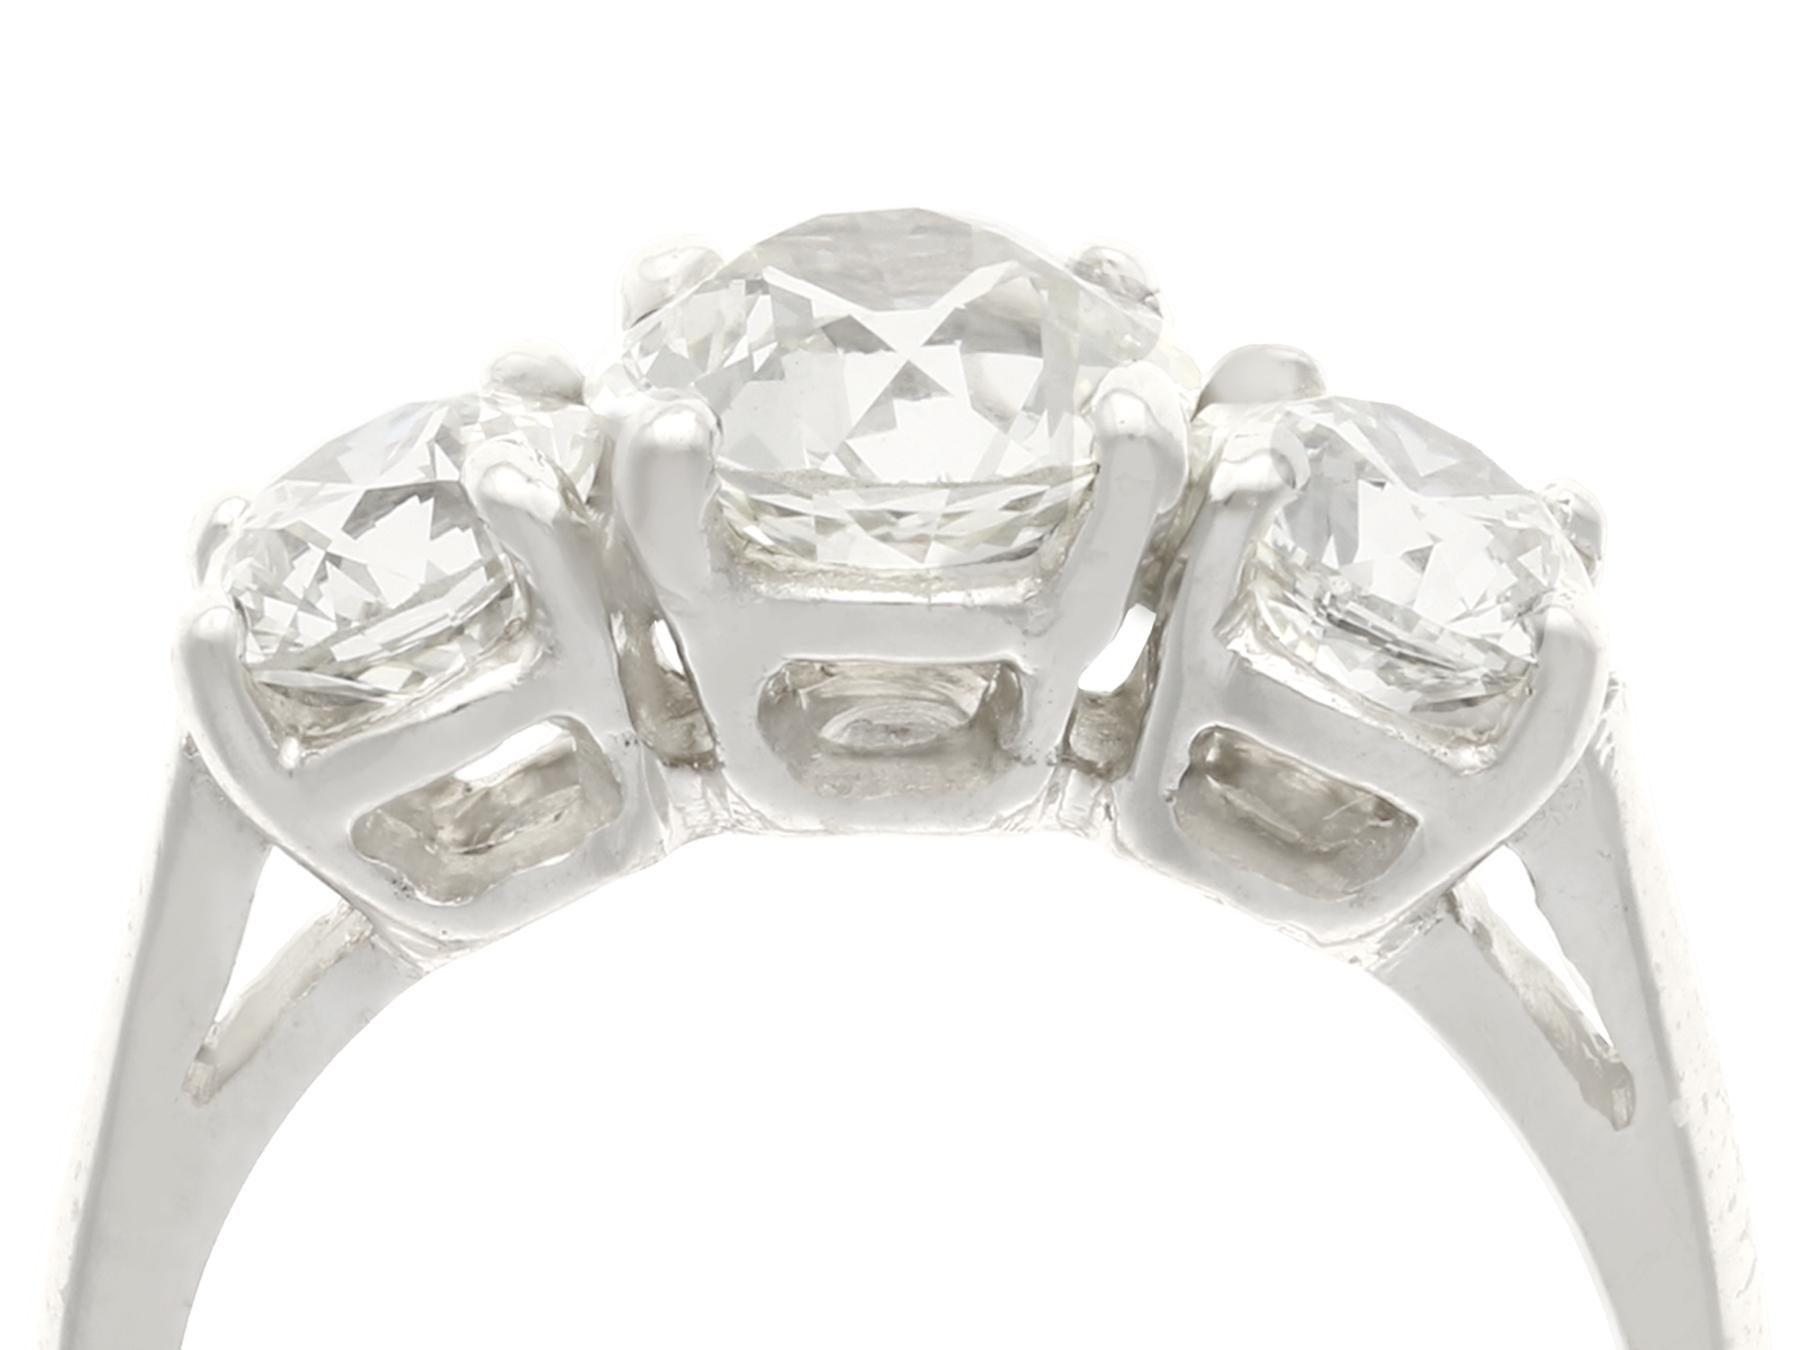 A stunning vintage 2.65 carat diamond and platinum trilogy ring, set with an antique feature diamond; part of our diverse vintage jewelry collections.

This stunning, fine and impressive trilogy ring has been crafted in platinum.

The pierced